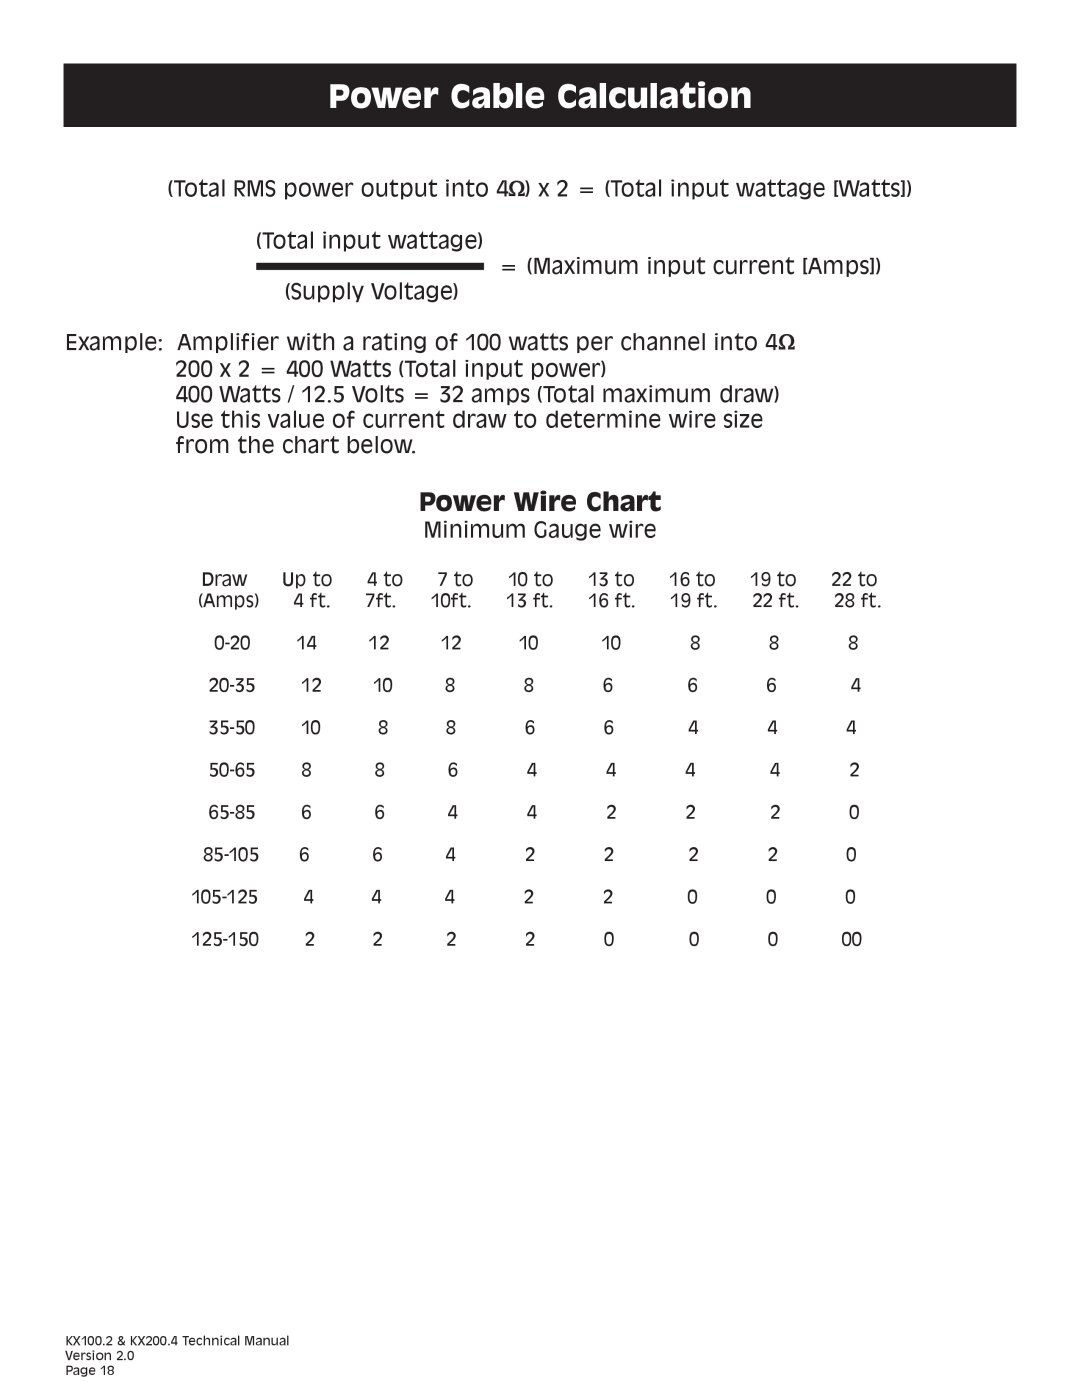 Kicker KX200.4 technical manual Power Cable Calculation, Power Wire Chart 